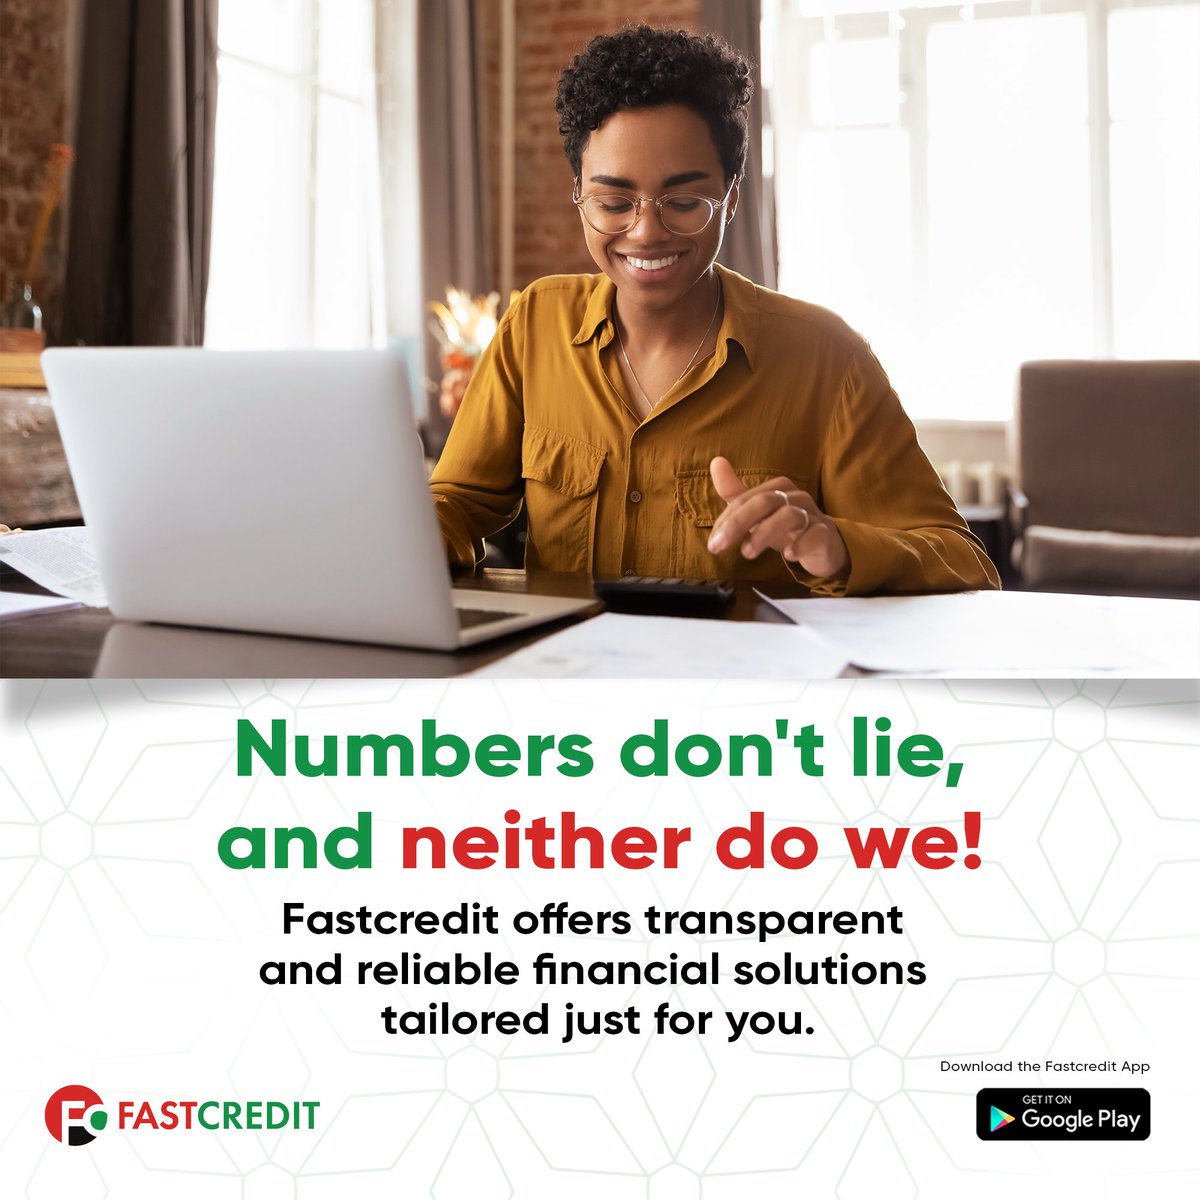 Leverage our financial solutions to scale up your business.
visit fastcredit-ng.com to get started.
#fastcredit
#Invoicefinancing
#banking